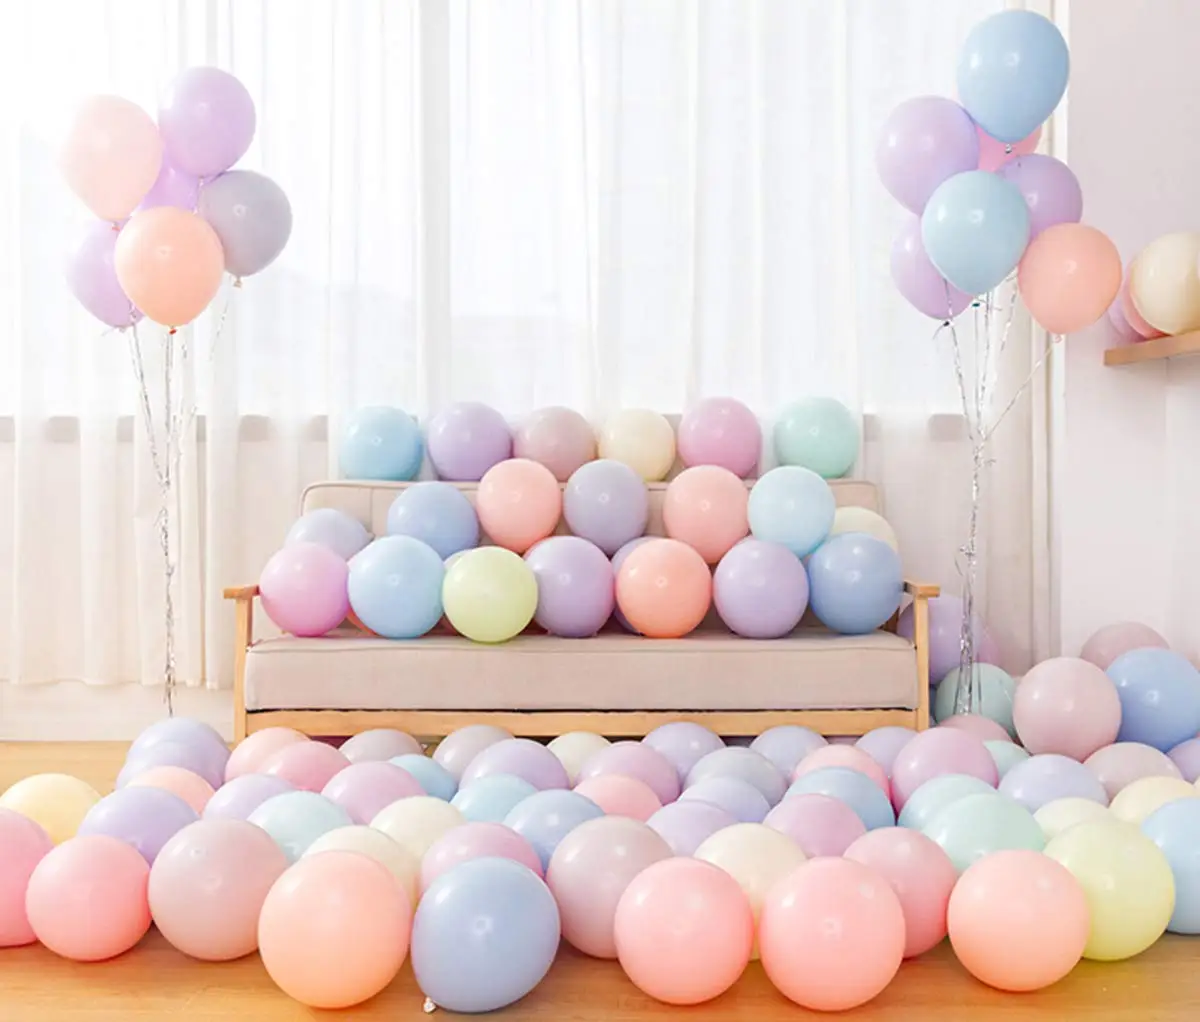 Pastel Balloons100 Pcs 10inches Assorted Pastel Balloons For Birthday Baby  Shower Party Decorations